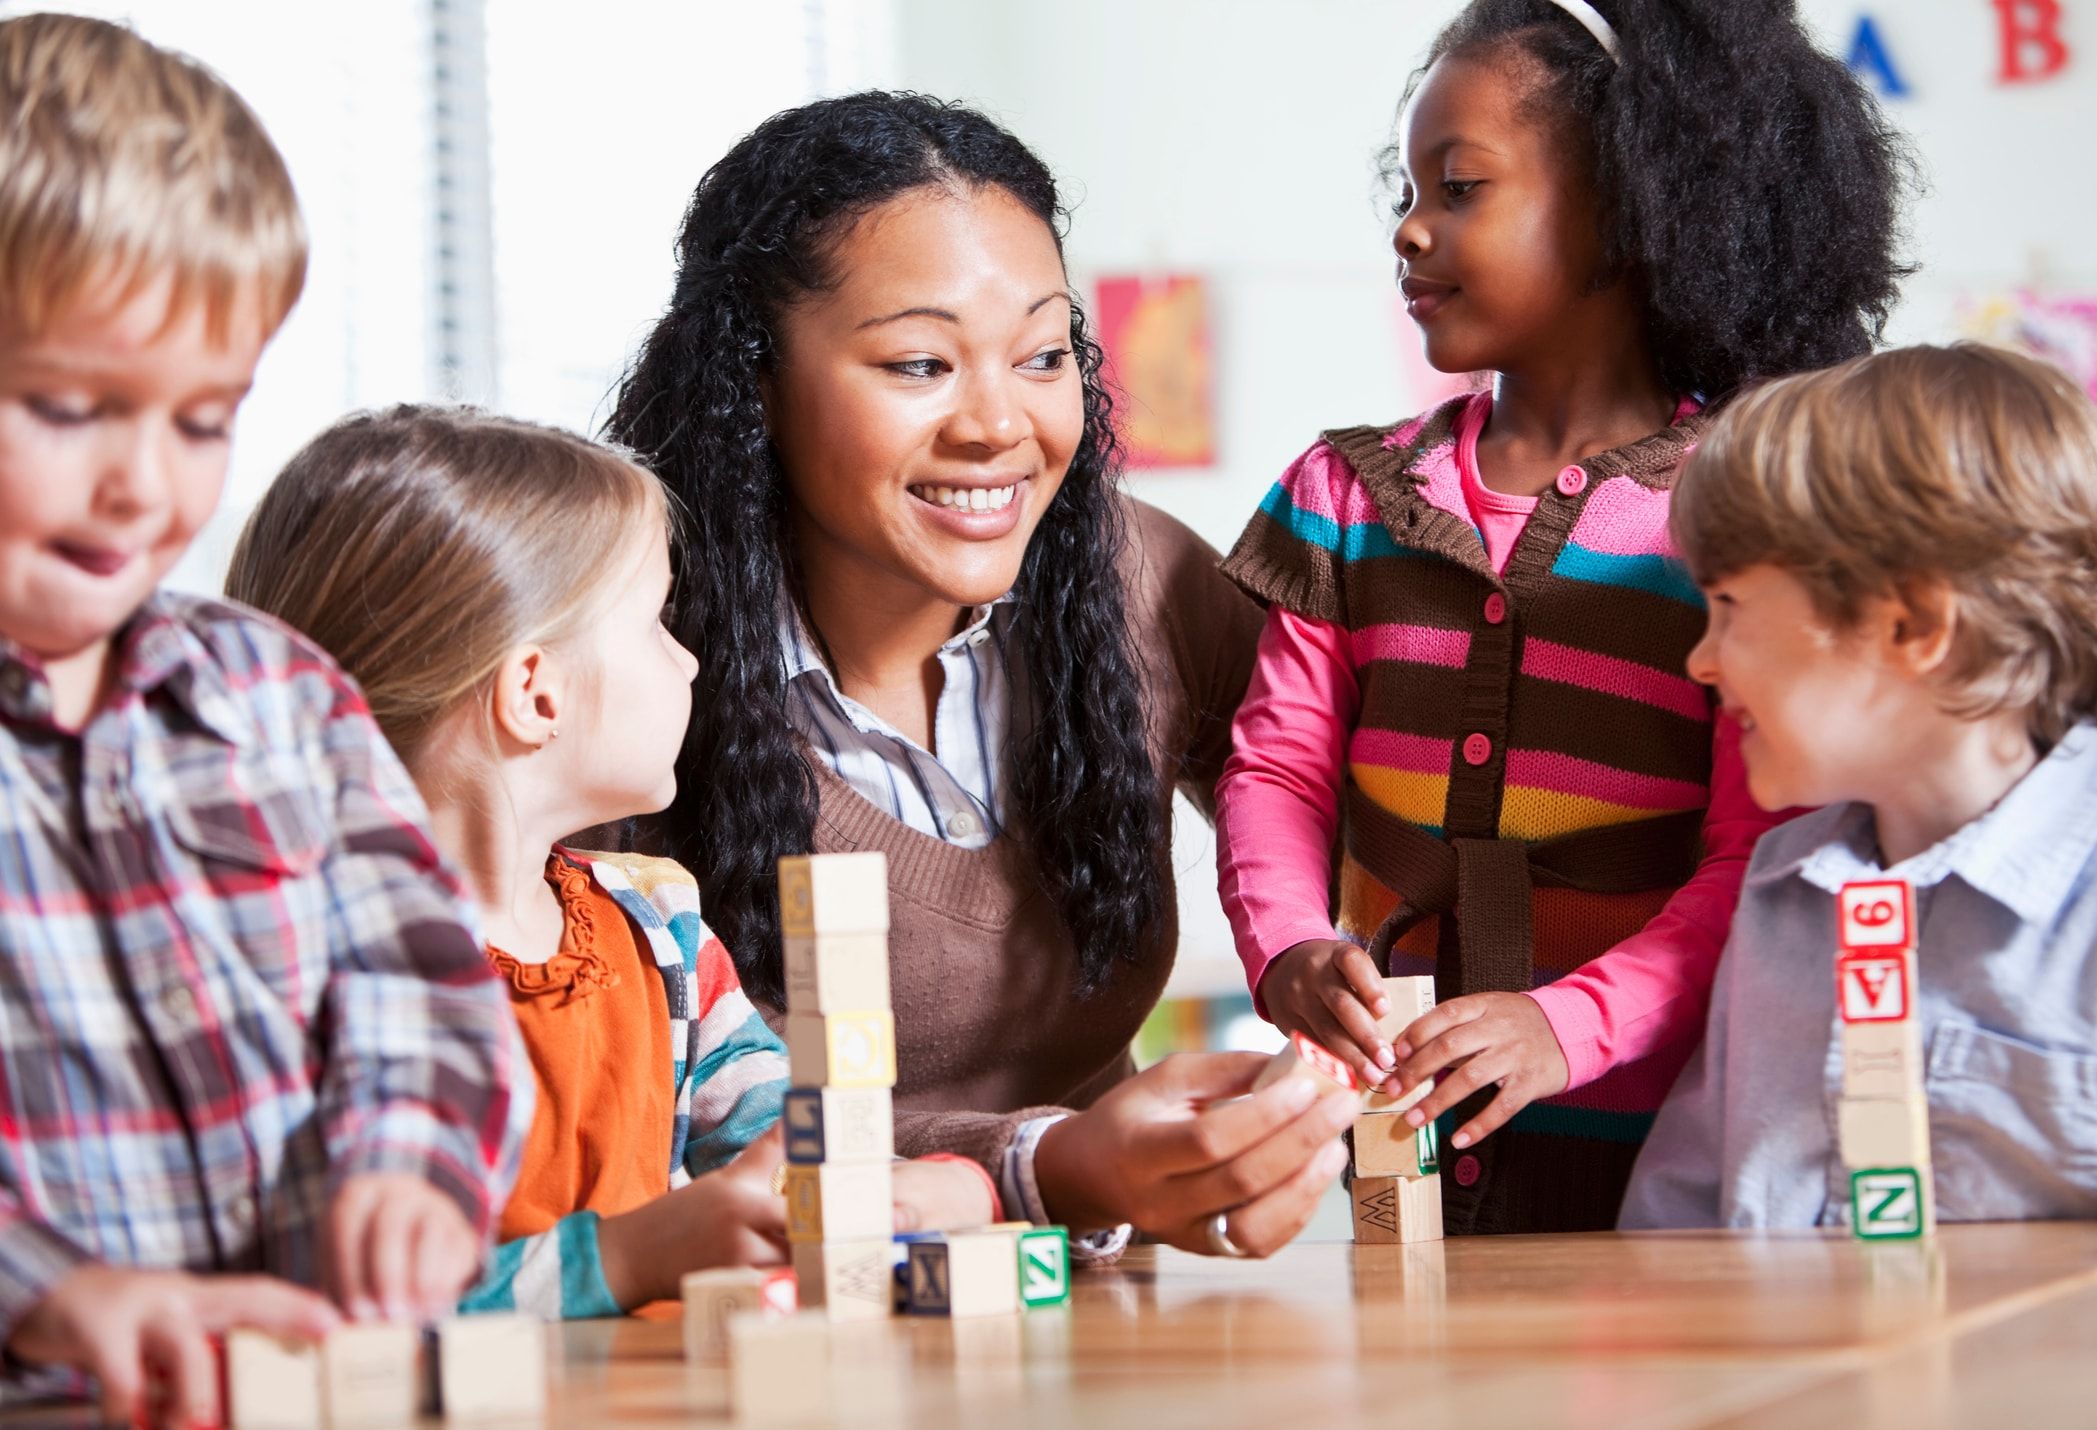 Day care: What are the different types and options?